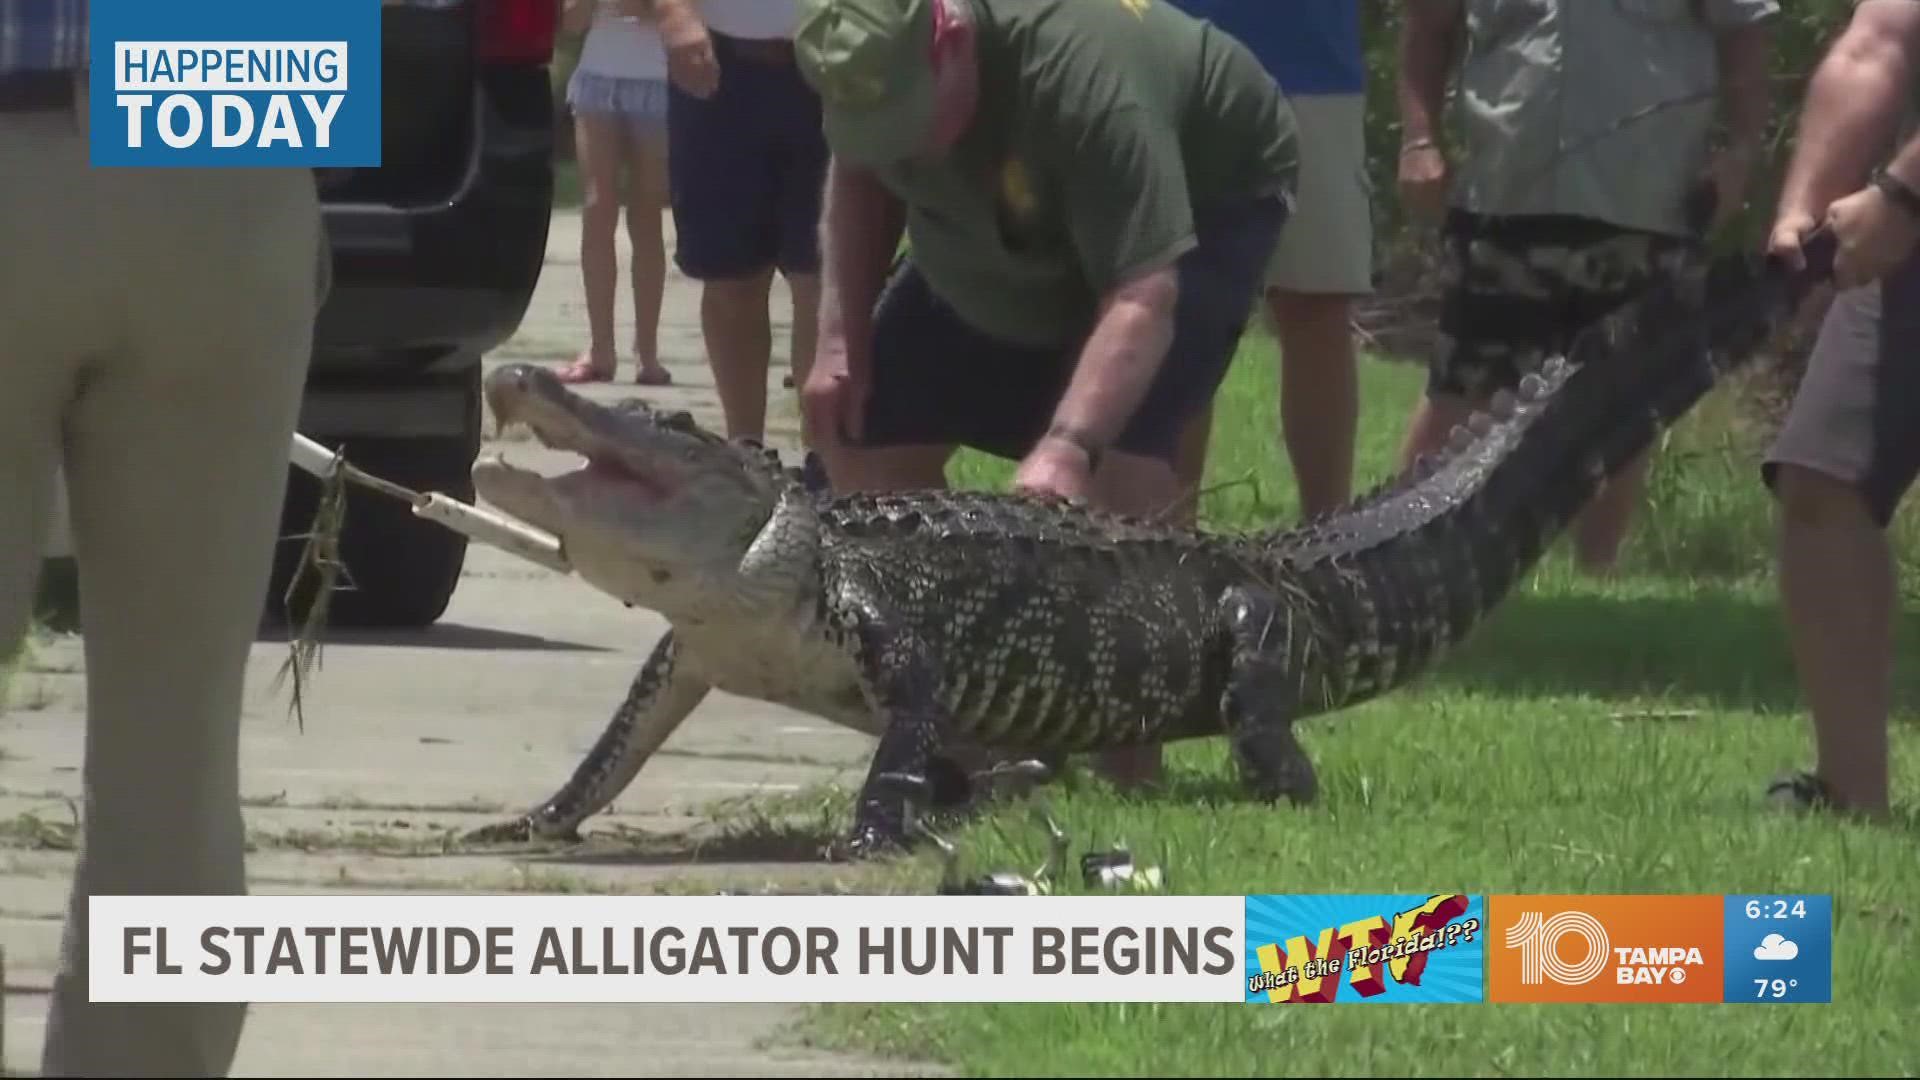 It's the state's way of controlling the alligator population.